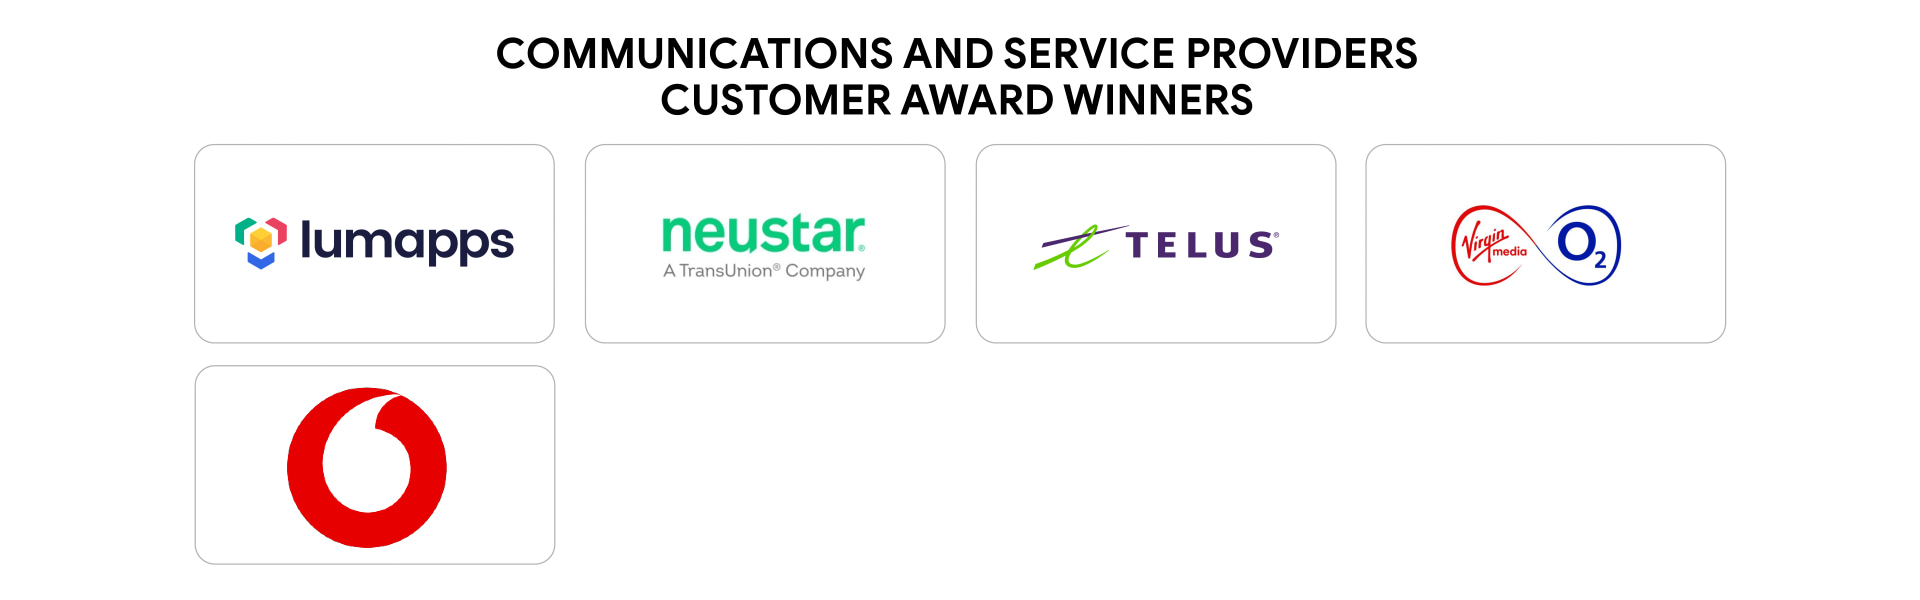 4 Communications and Service Providers.jpg